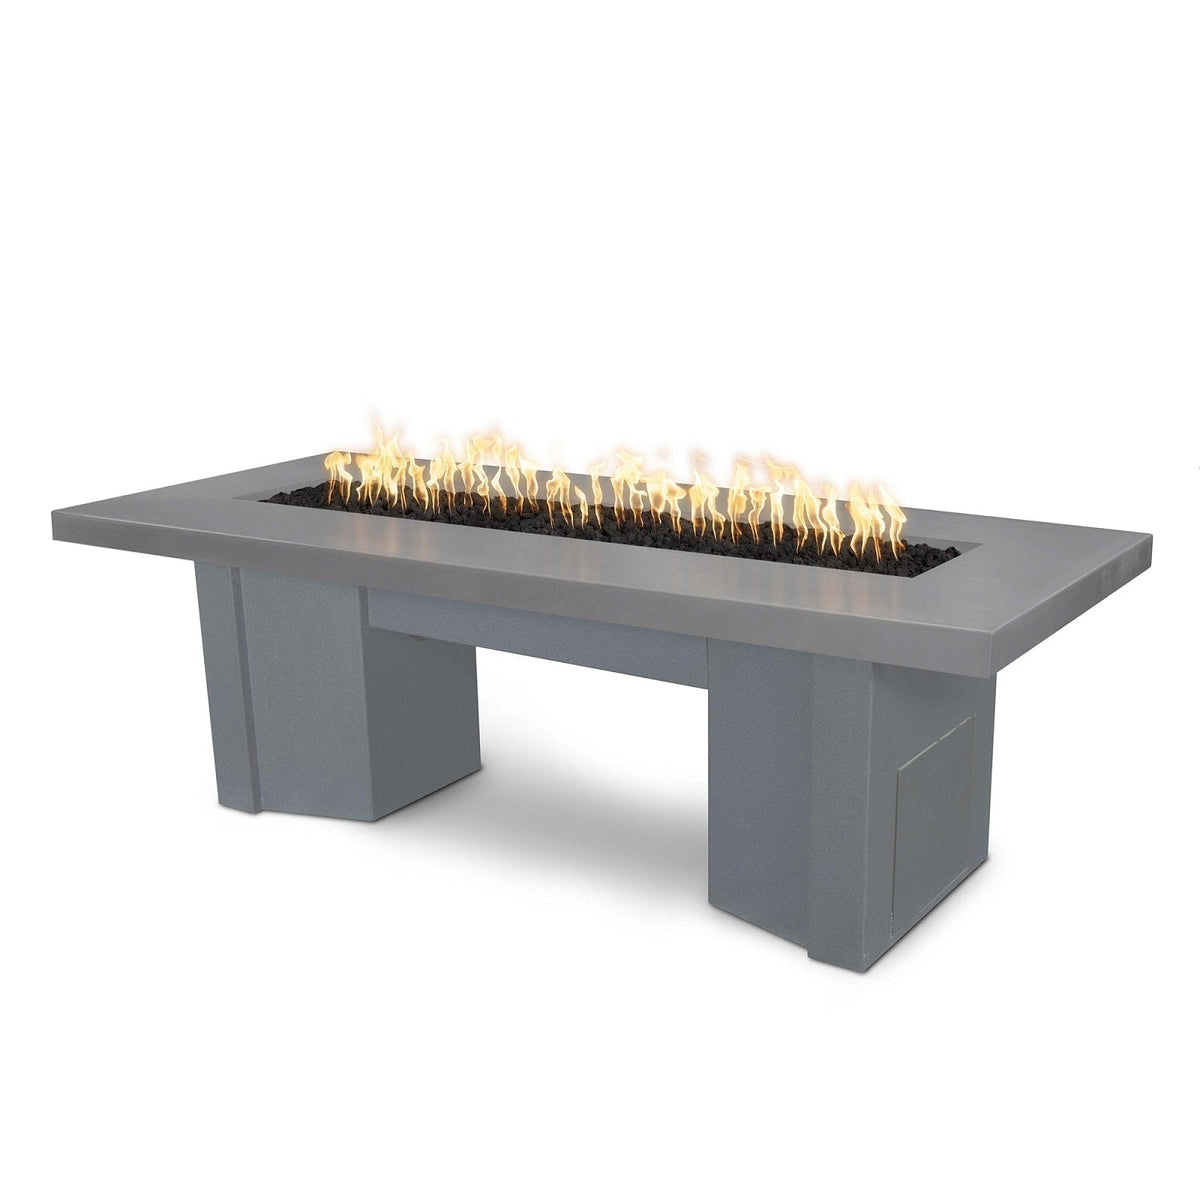 The Outdoor Plus Fire Features Natural Gray (-NGY) / Gray Powder Coated Steel (-GRY) The Outdoor Plus 60&quot; Alameda Fire Table Smooth Concrete in Liquid Propane - Flame Sense System with Push Button Spark Igniter / OPT-ALMGFRC60FSEN-LP